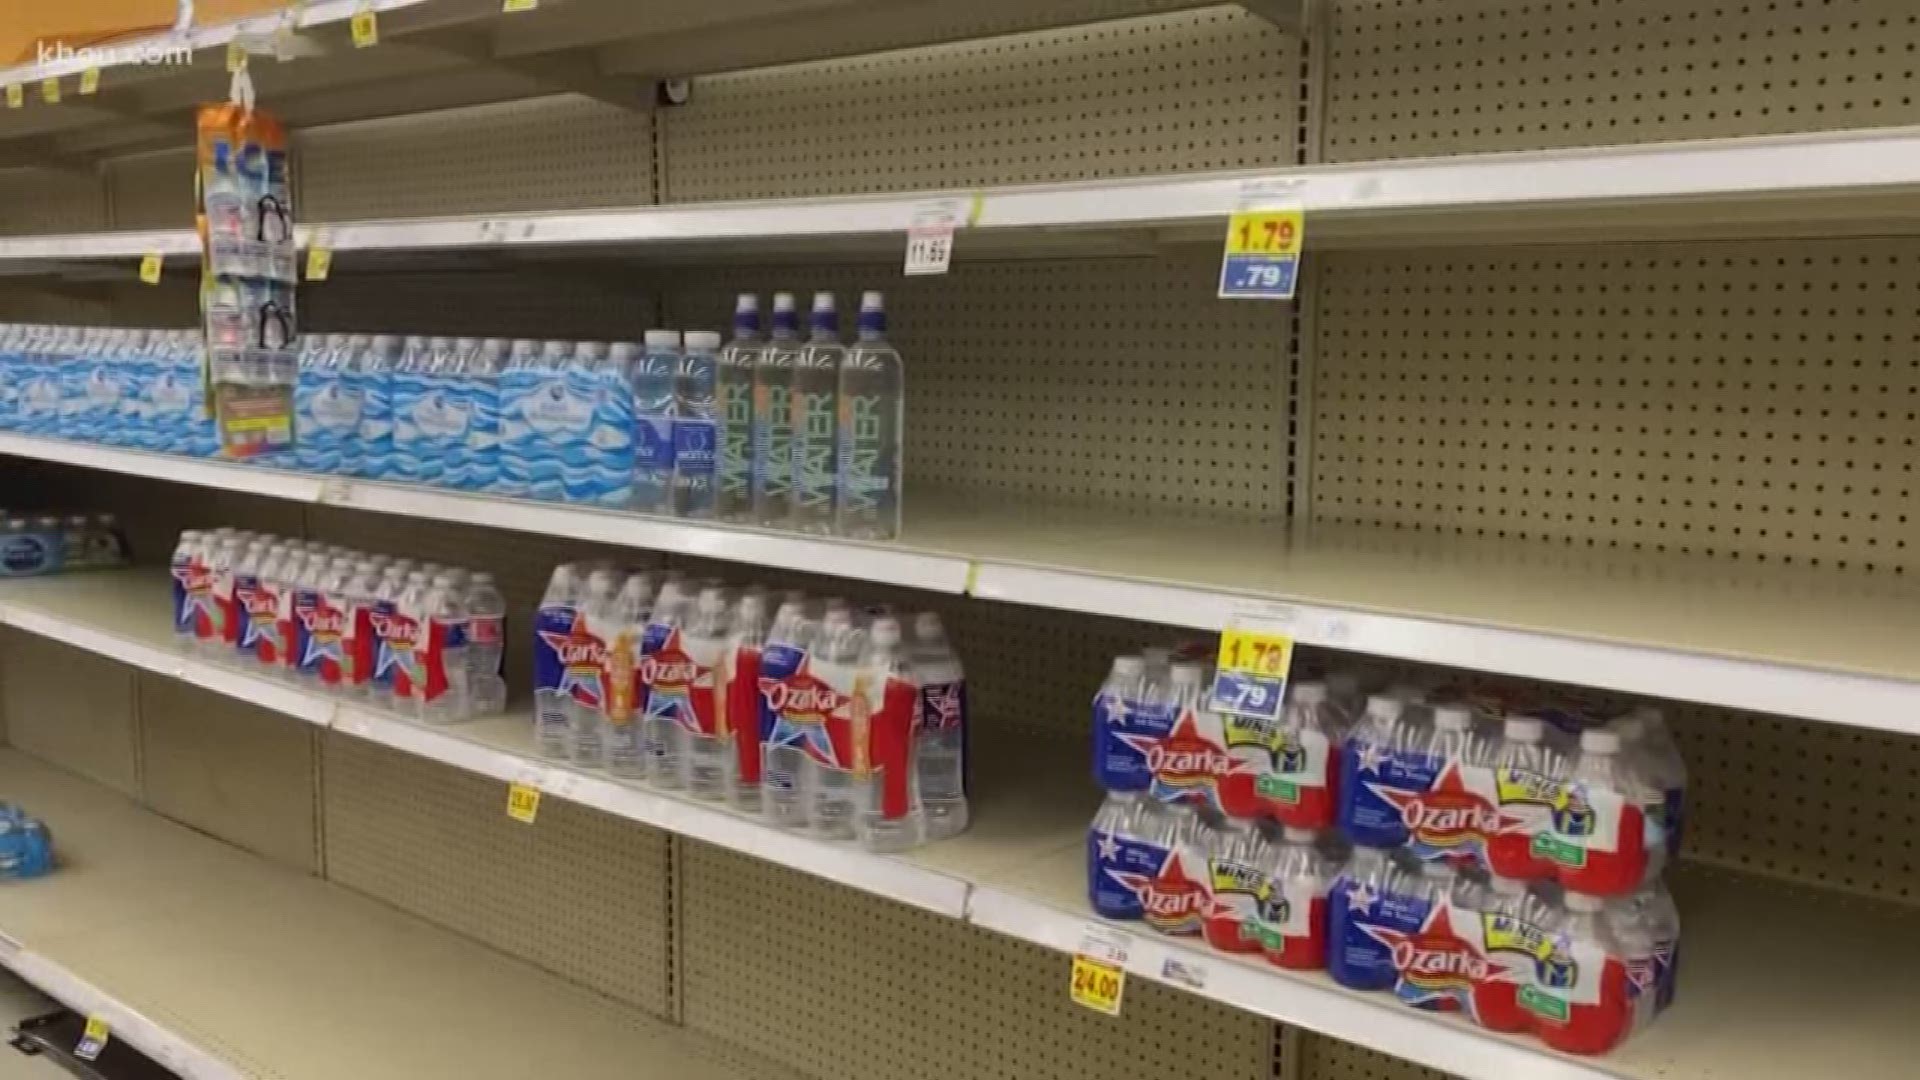 Houston-area grocers and other stores working to keep water on the shelves after unexpected water boil notice due to major water main break.